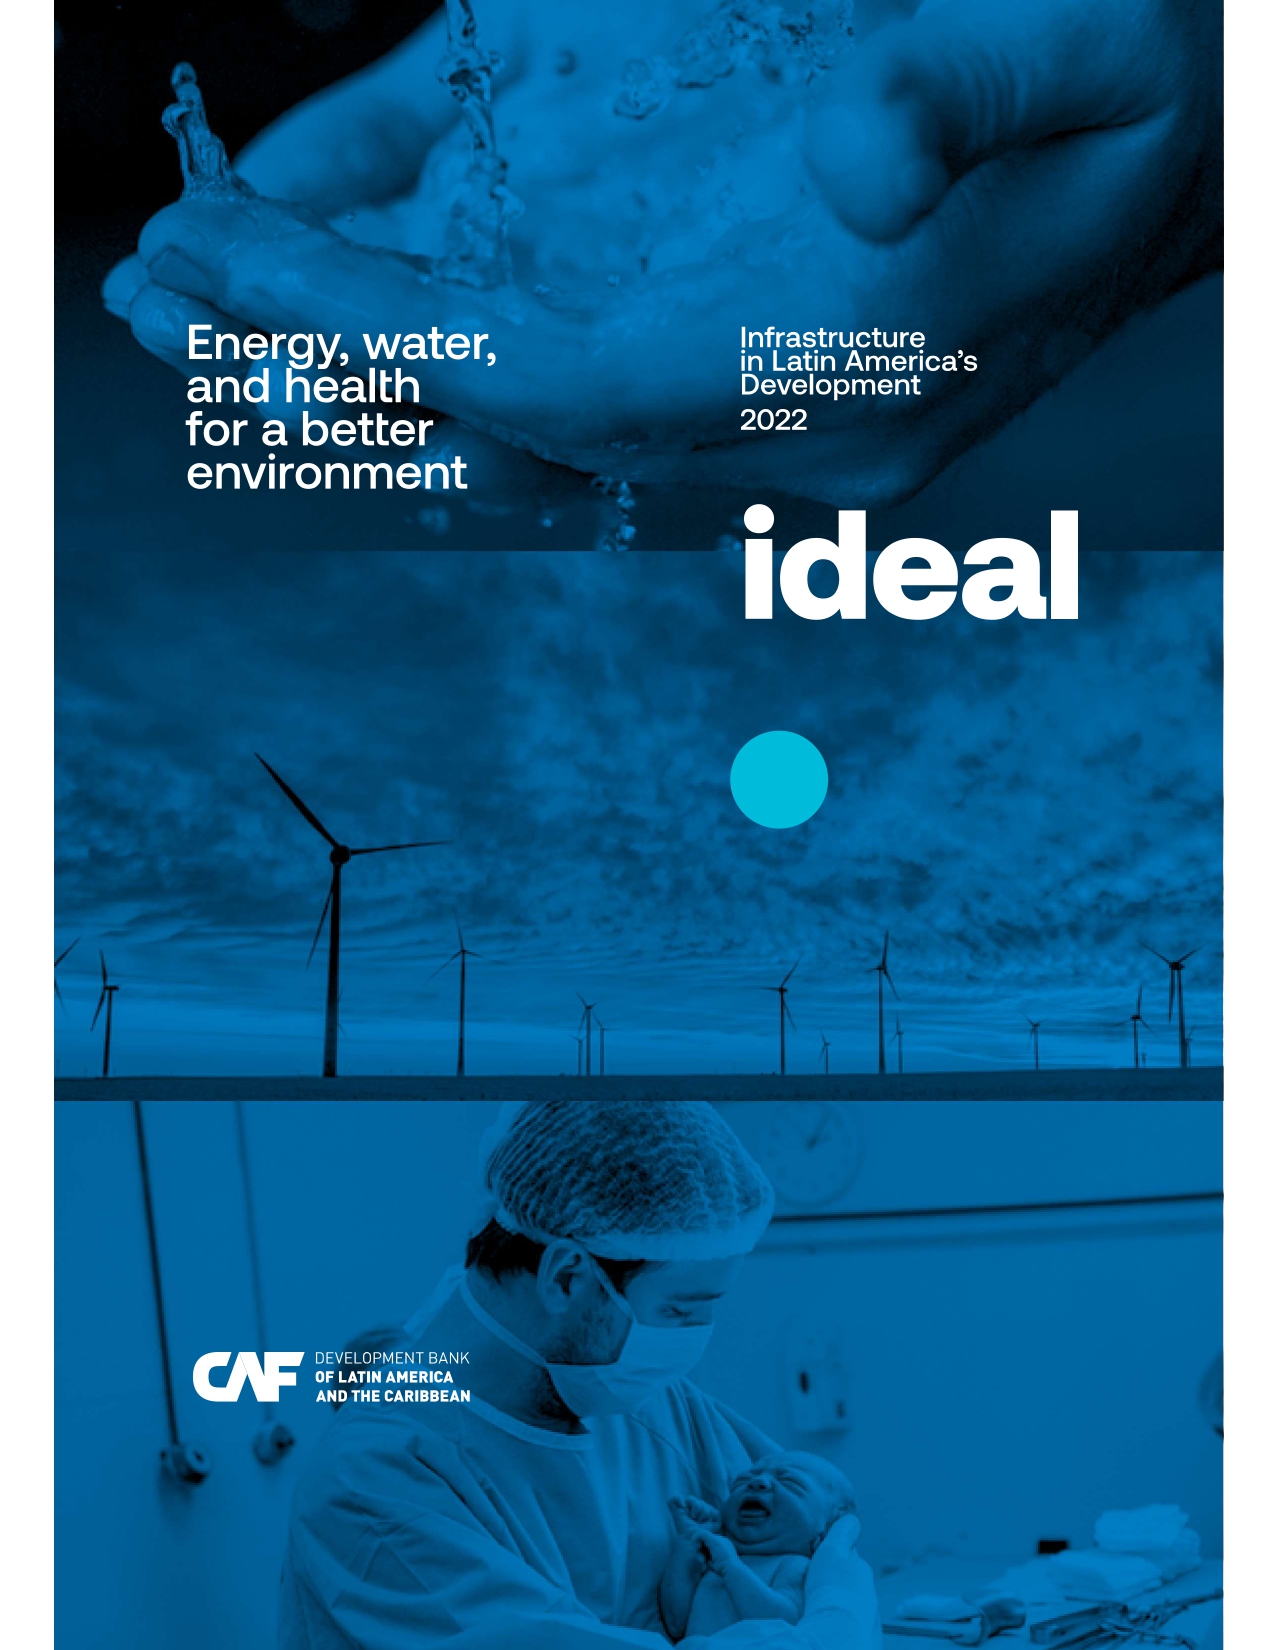 Ideal 2022: Energy, water, and health for a better environment